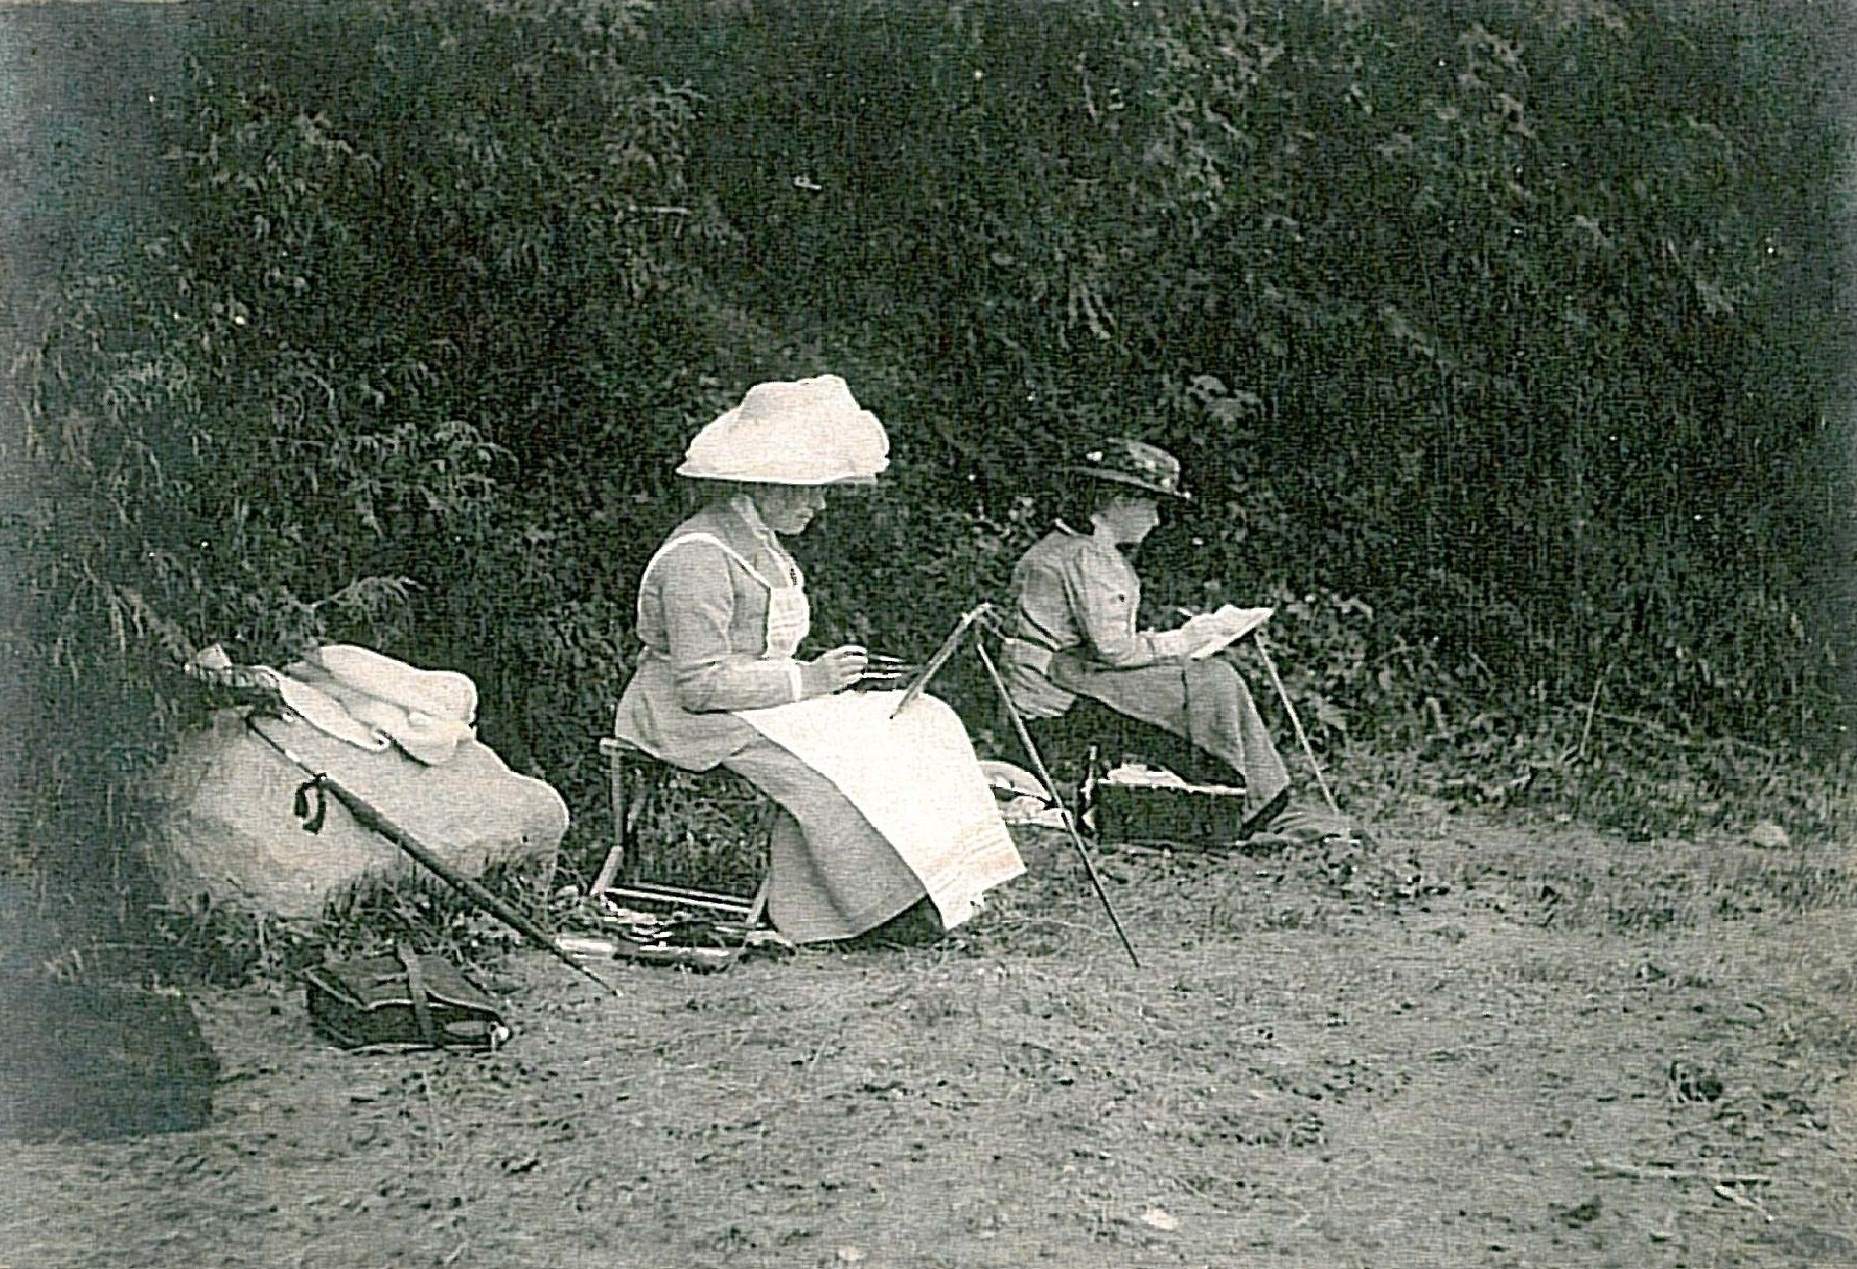 Two women painting on a beach, canvases on portable easels.